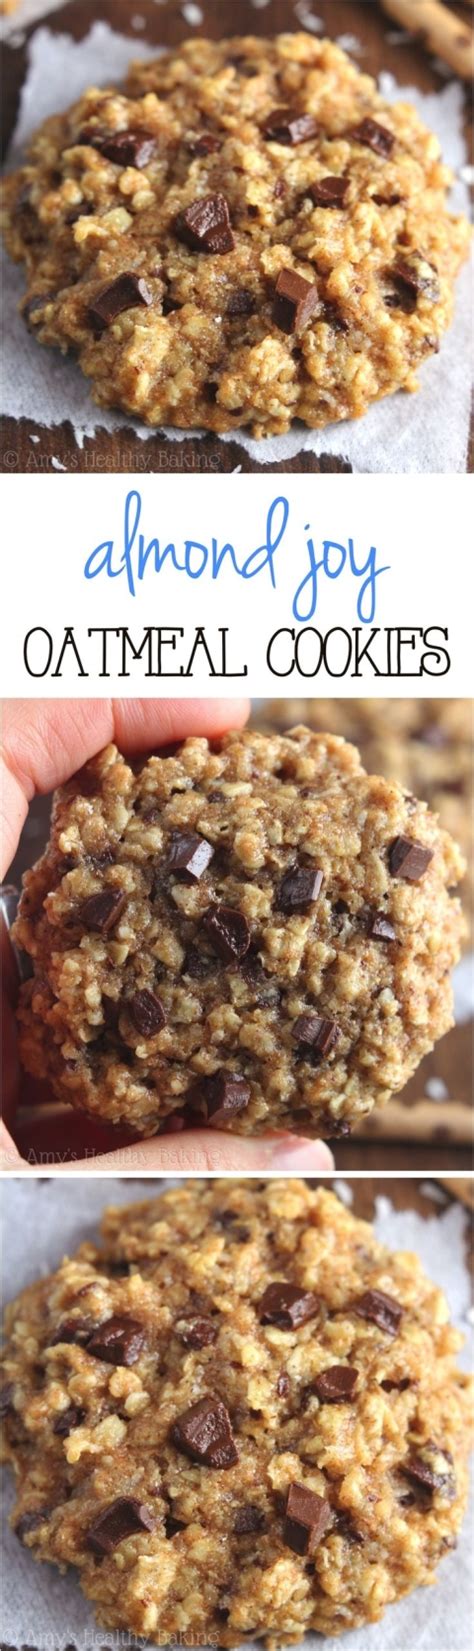 Enter your email to signup for the cooks.com recipe newsletter. Almond Joy Oatmeal Cookies Recipe | Dessert recipes, Healthy baking